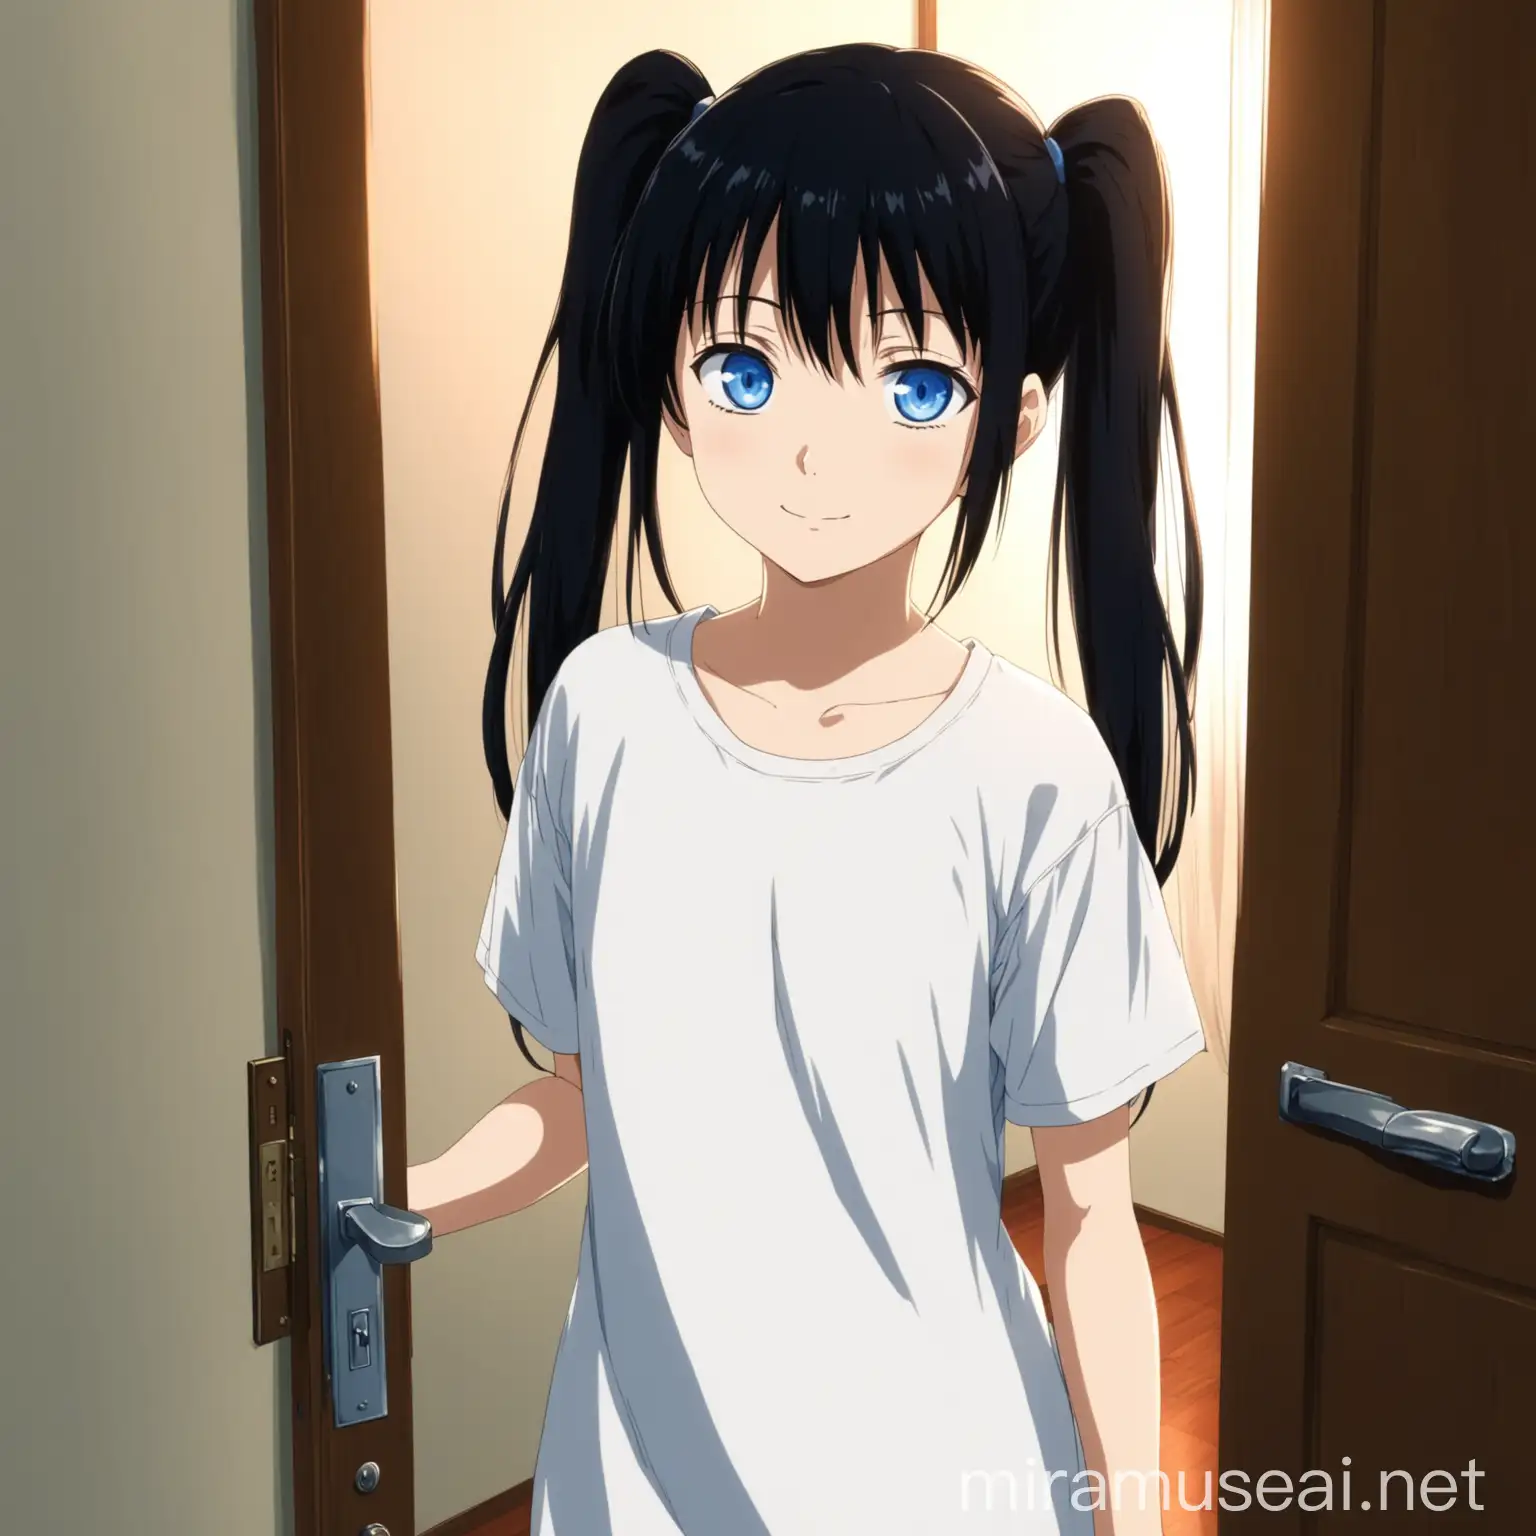 18 years old anime girl with black twintail and blue eyes standing in living room opening door wearing big white shirt and underwear soft smile